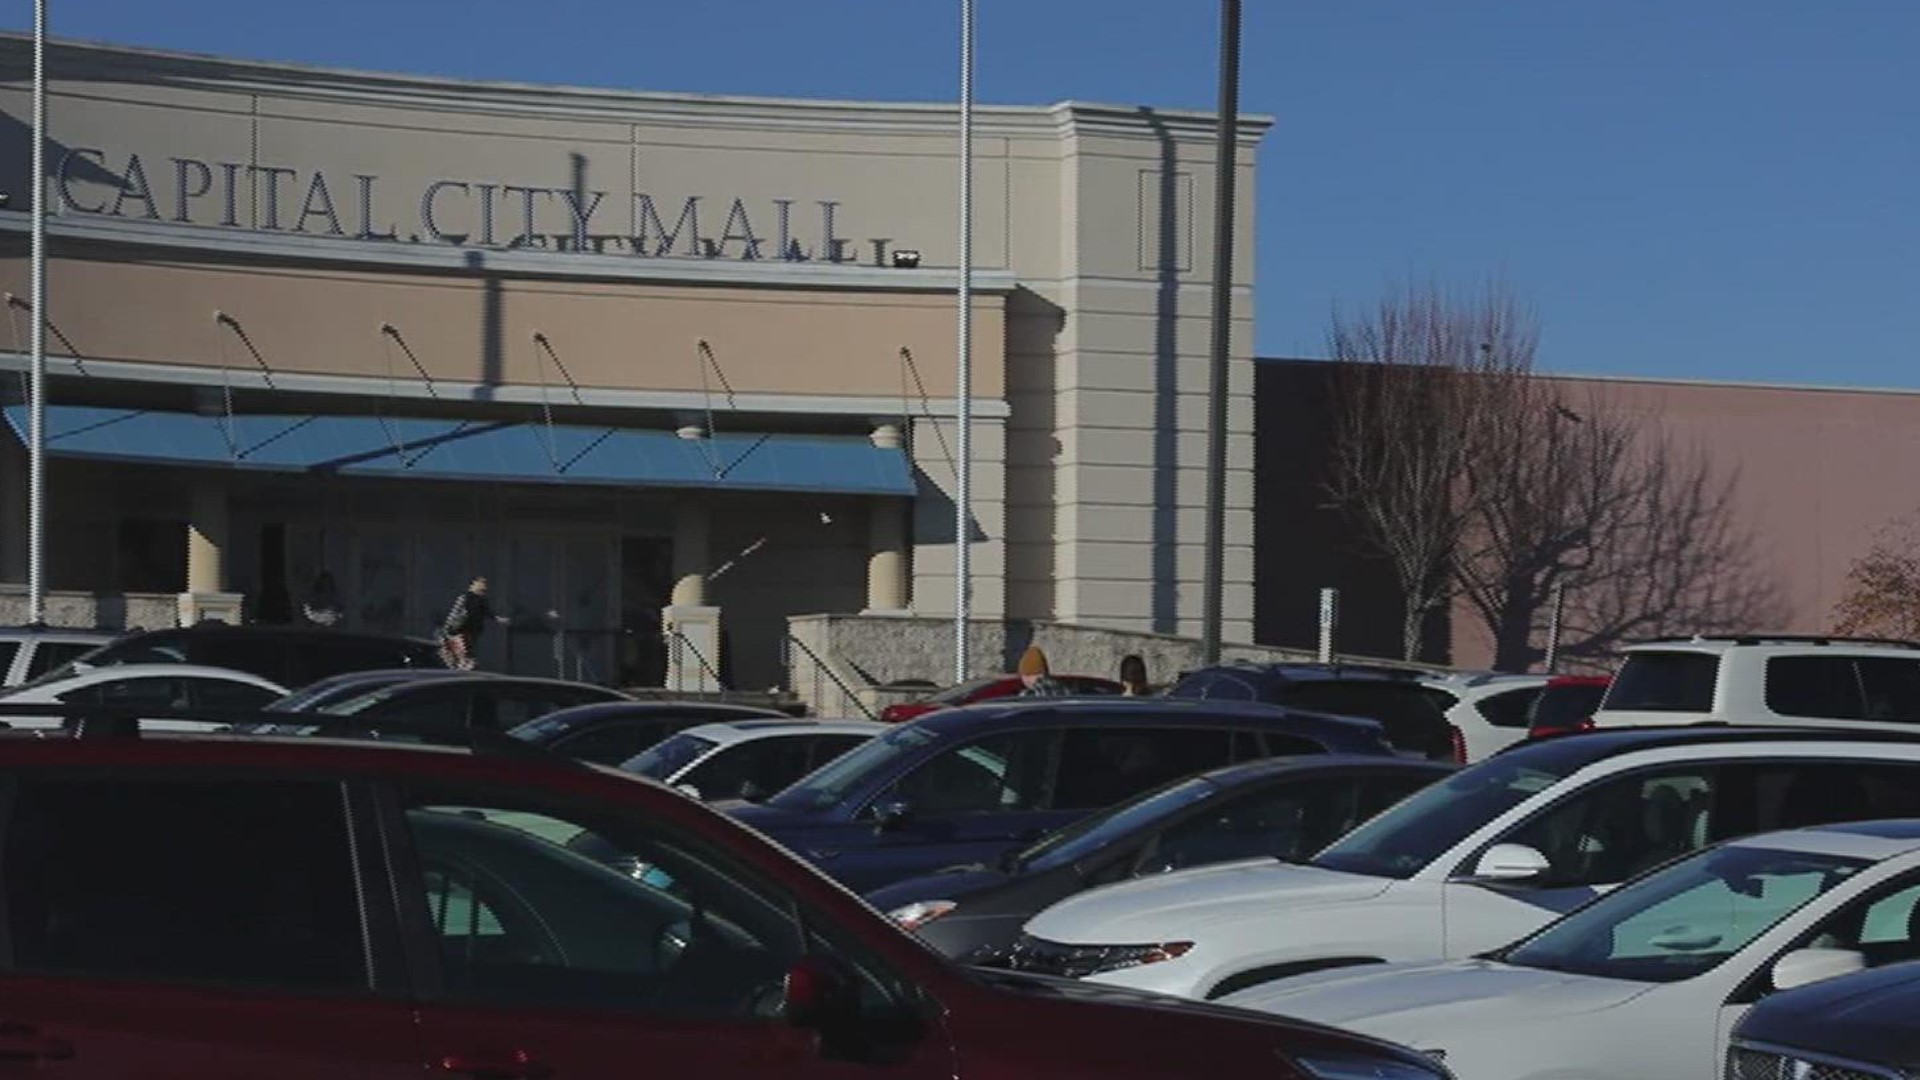 While many malls across the country have been repurposed or even closed due to the emergence of online shopping, shop owners say the Capital City Mal is thriving.